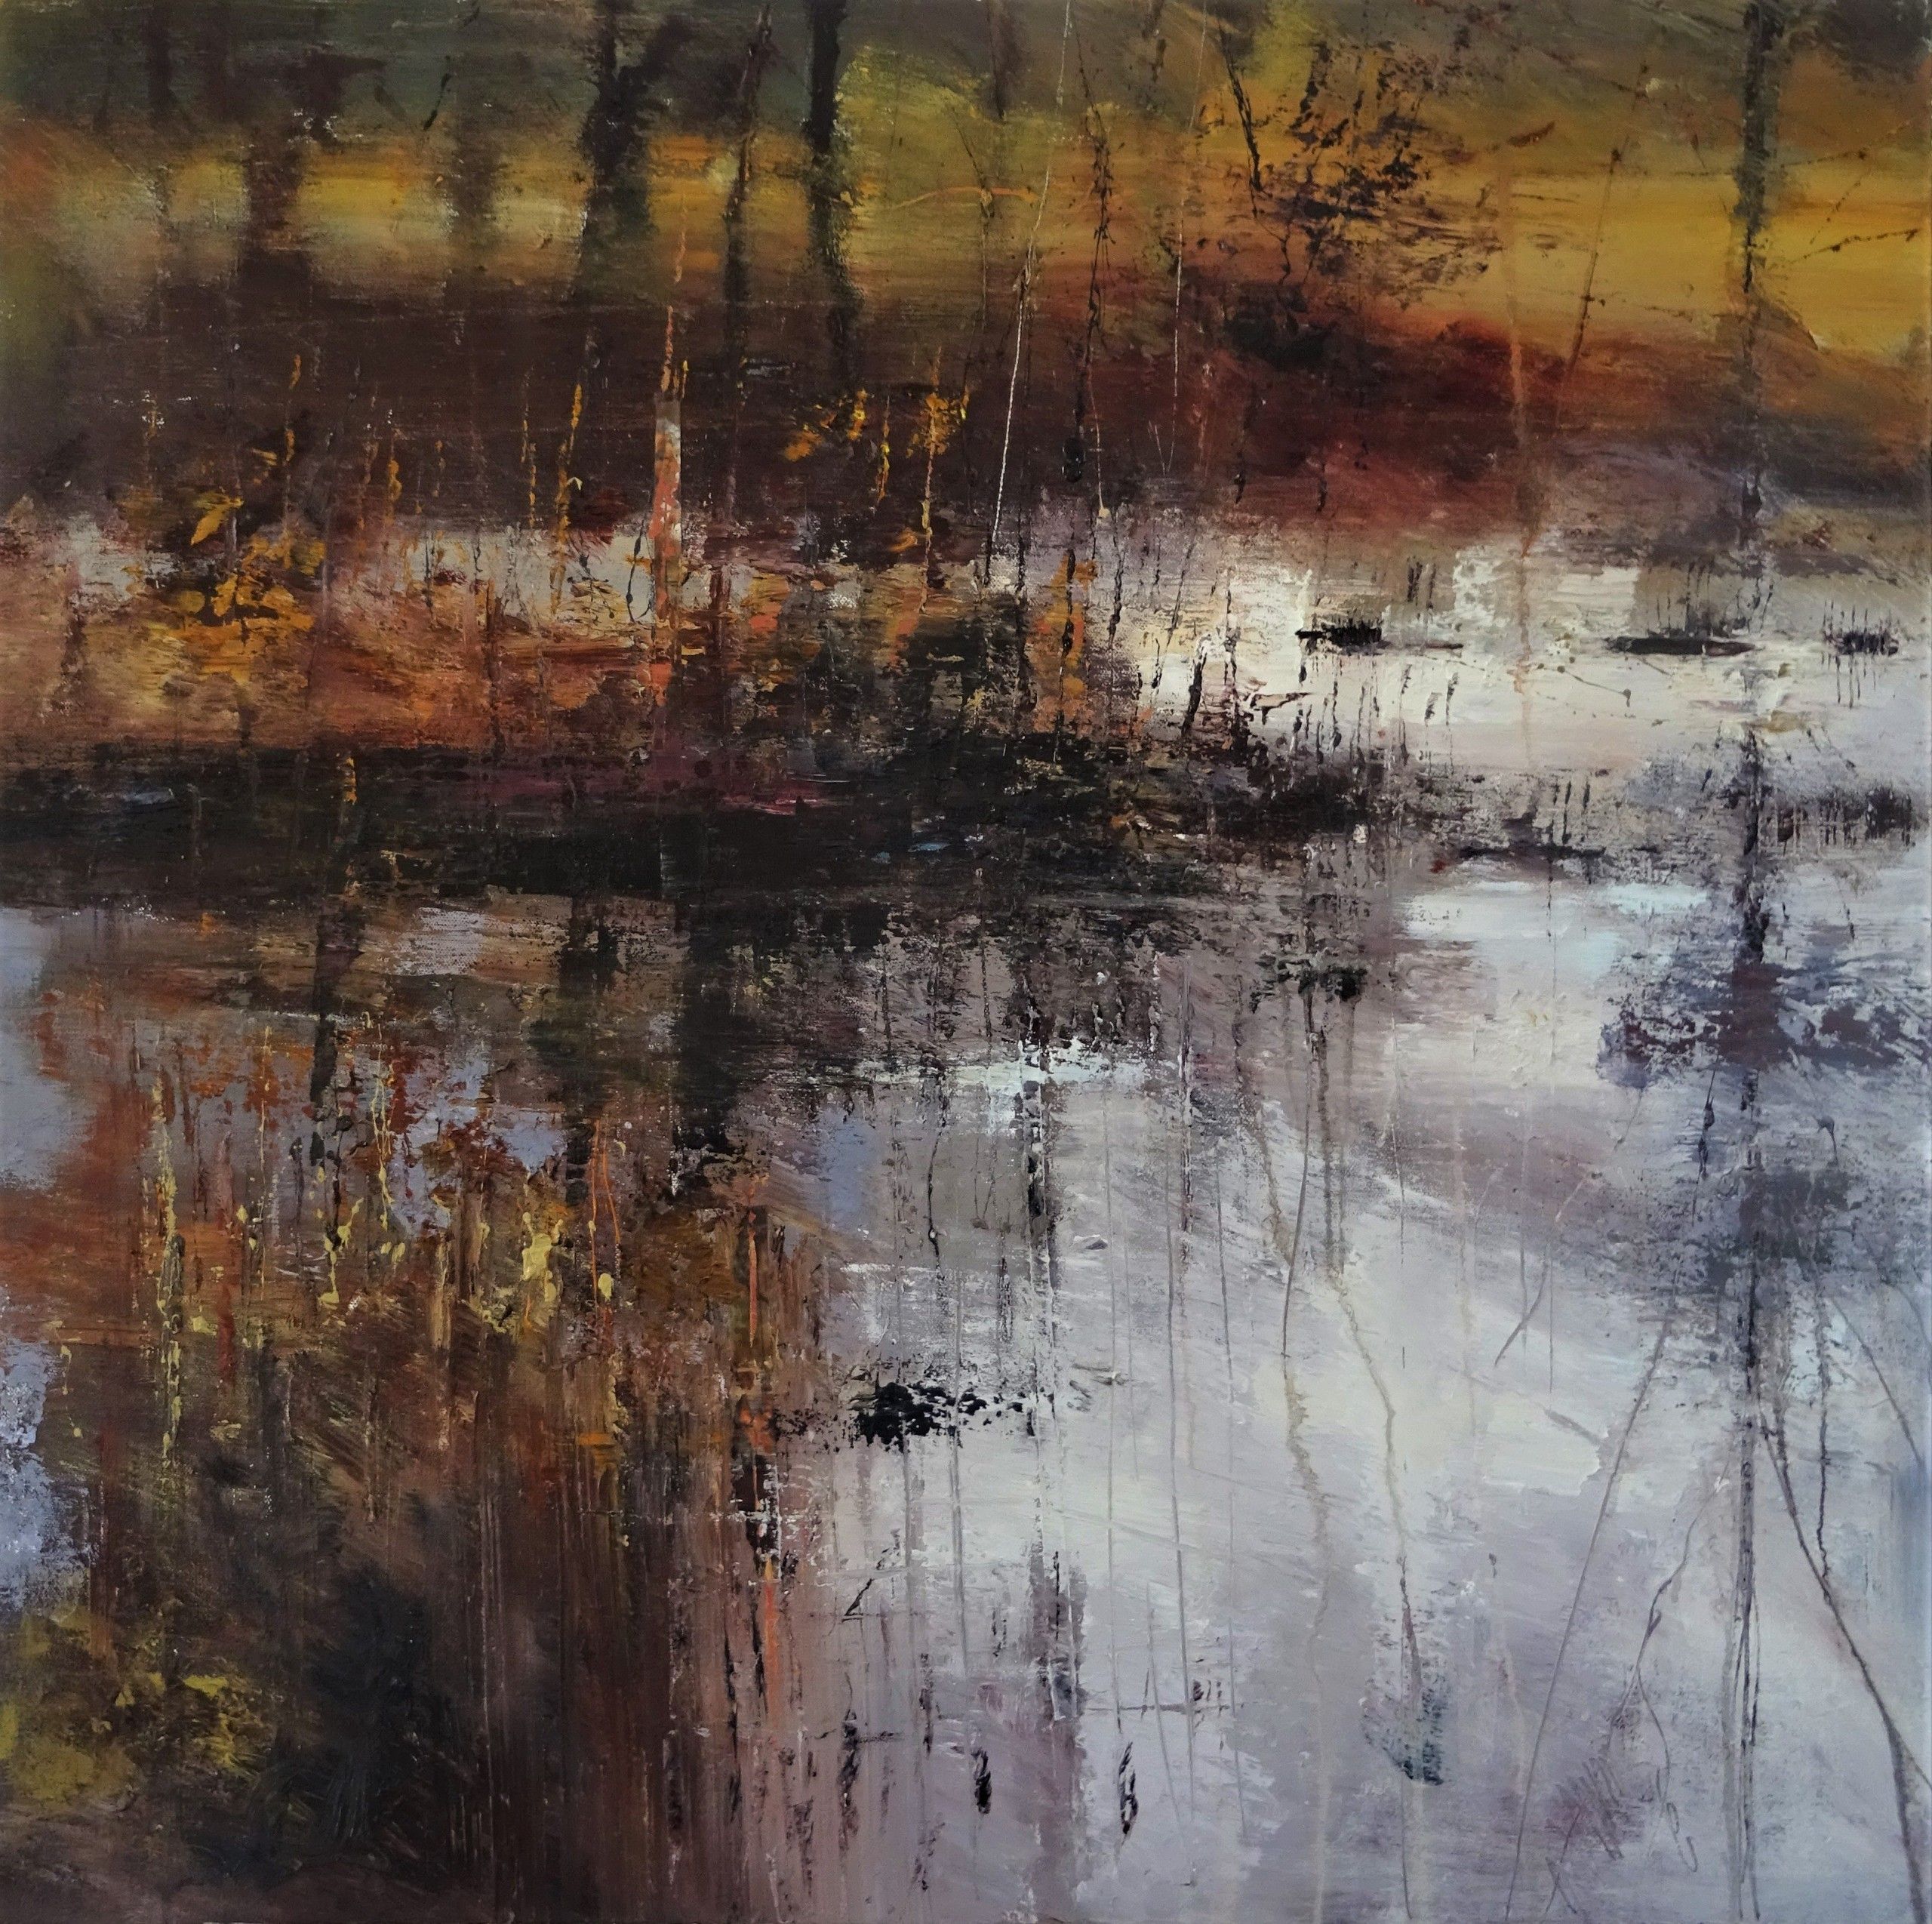 Beneath the Surface 4 by Claire Wiltsher